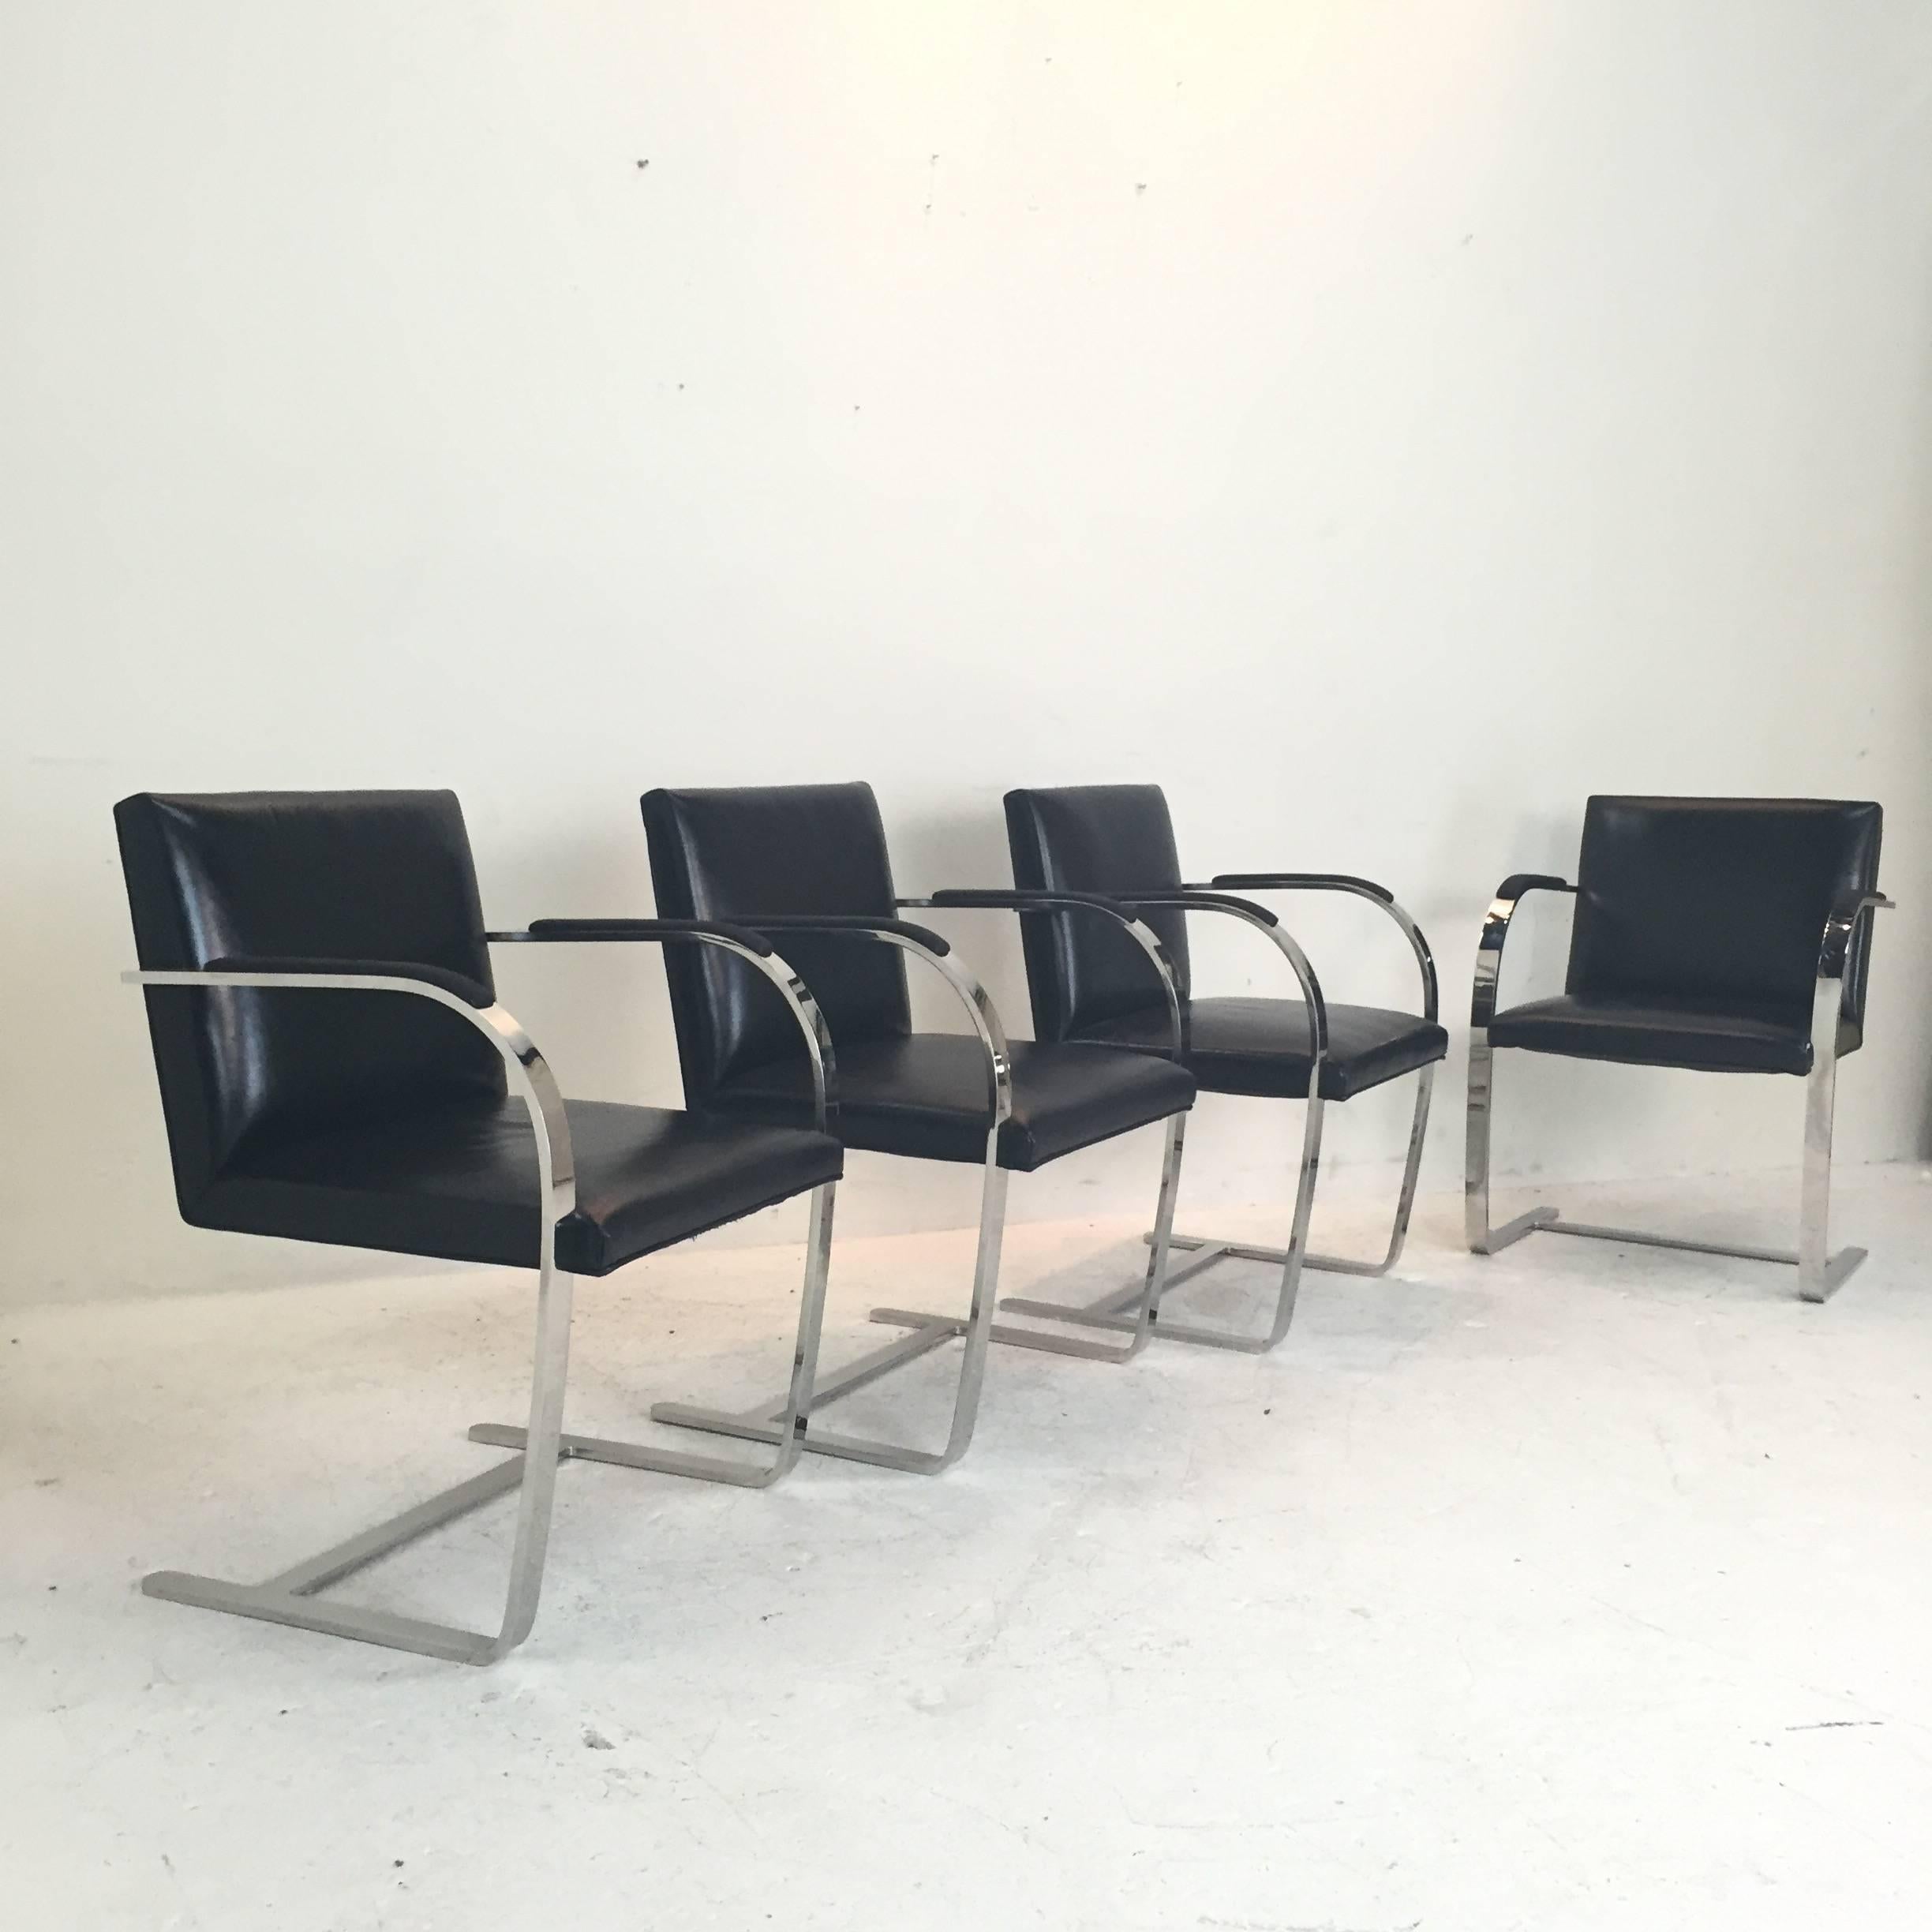 20th Century Four Stainless Brno Chairs with Sharkskin Arm Pads